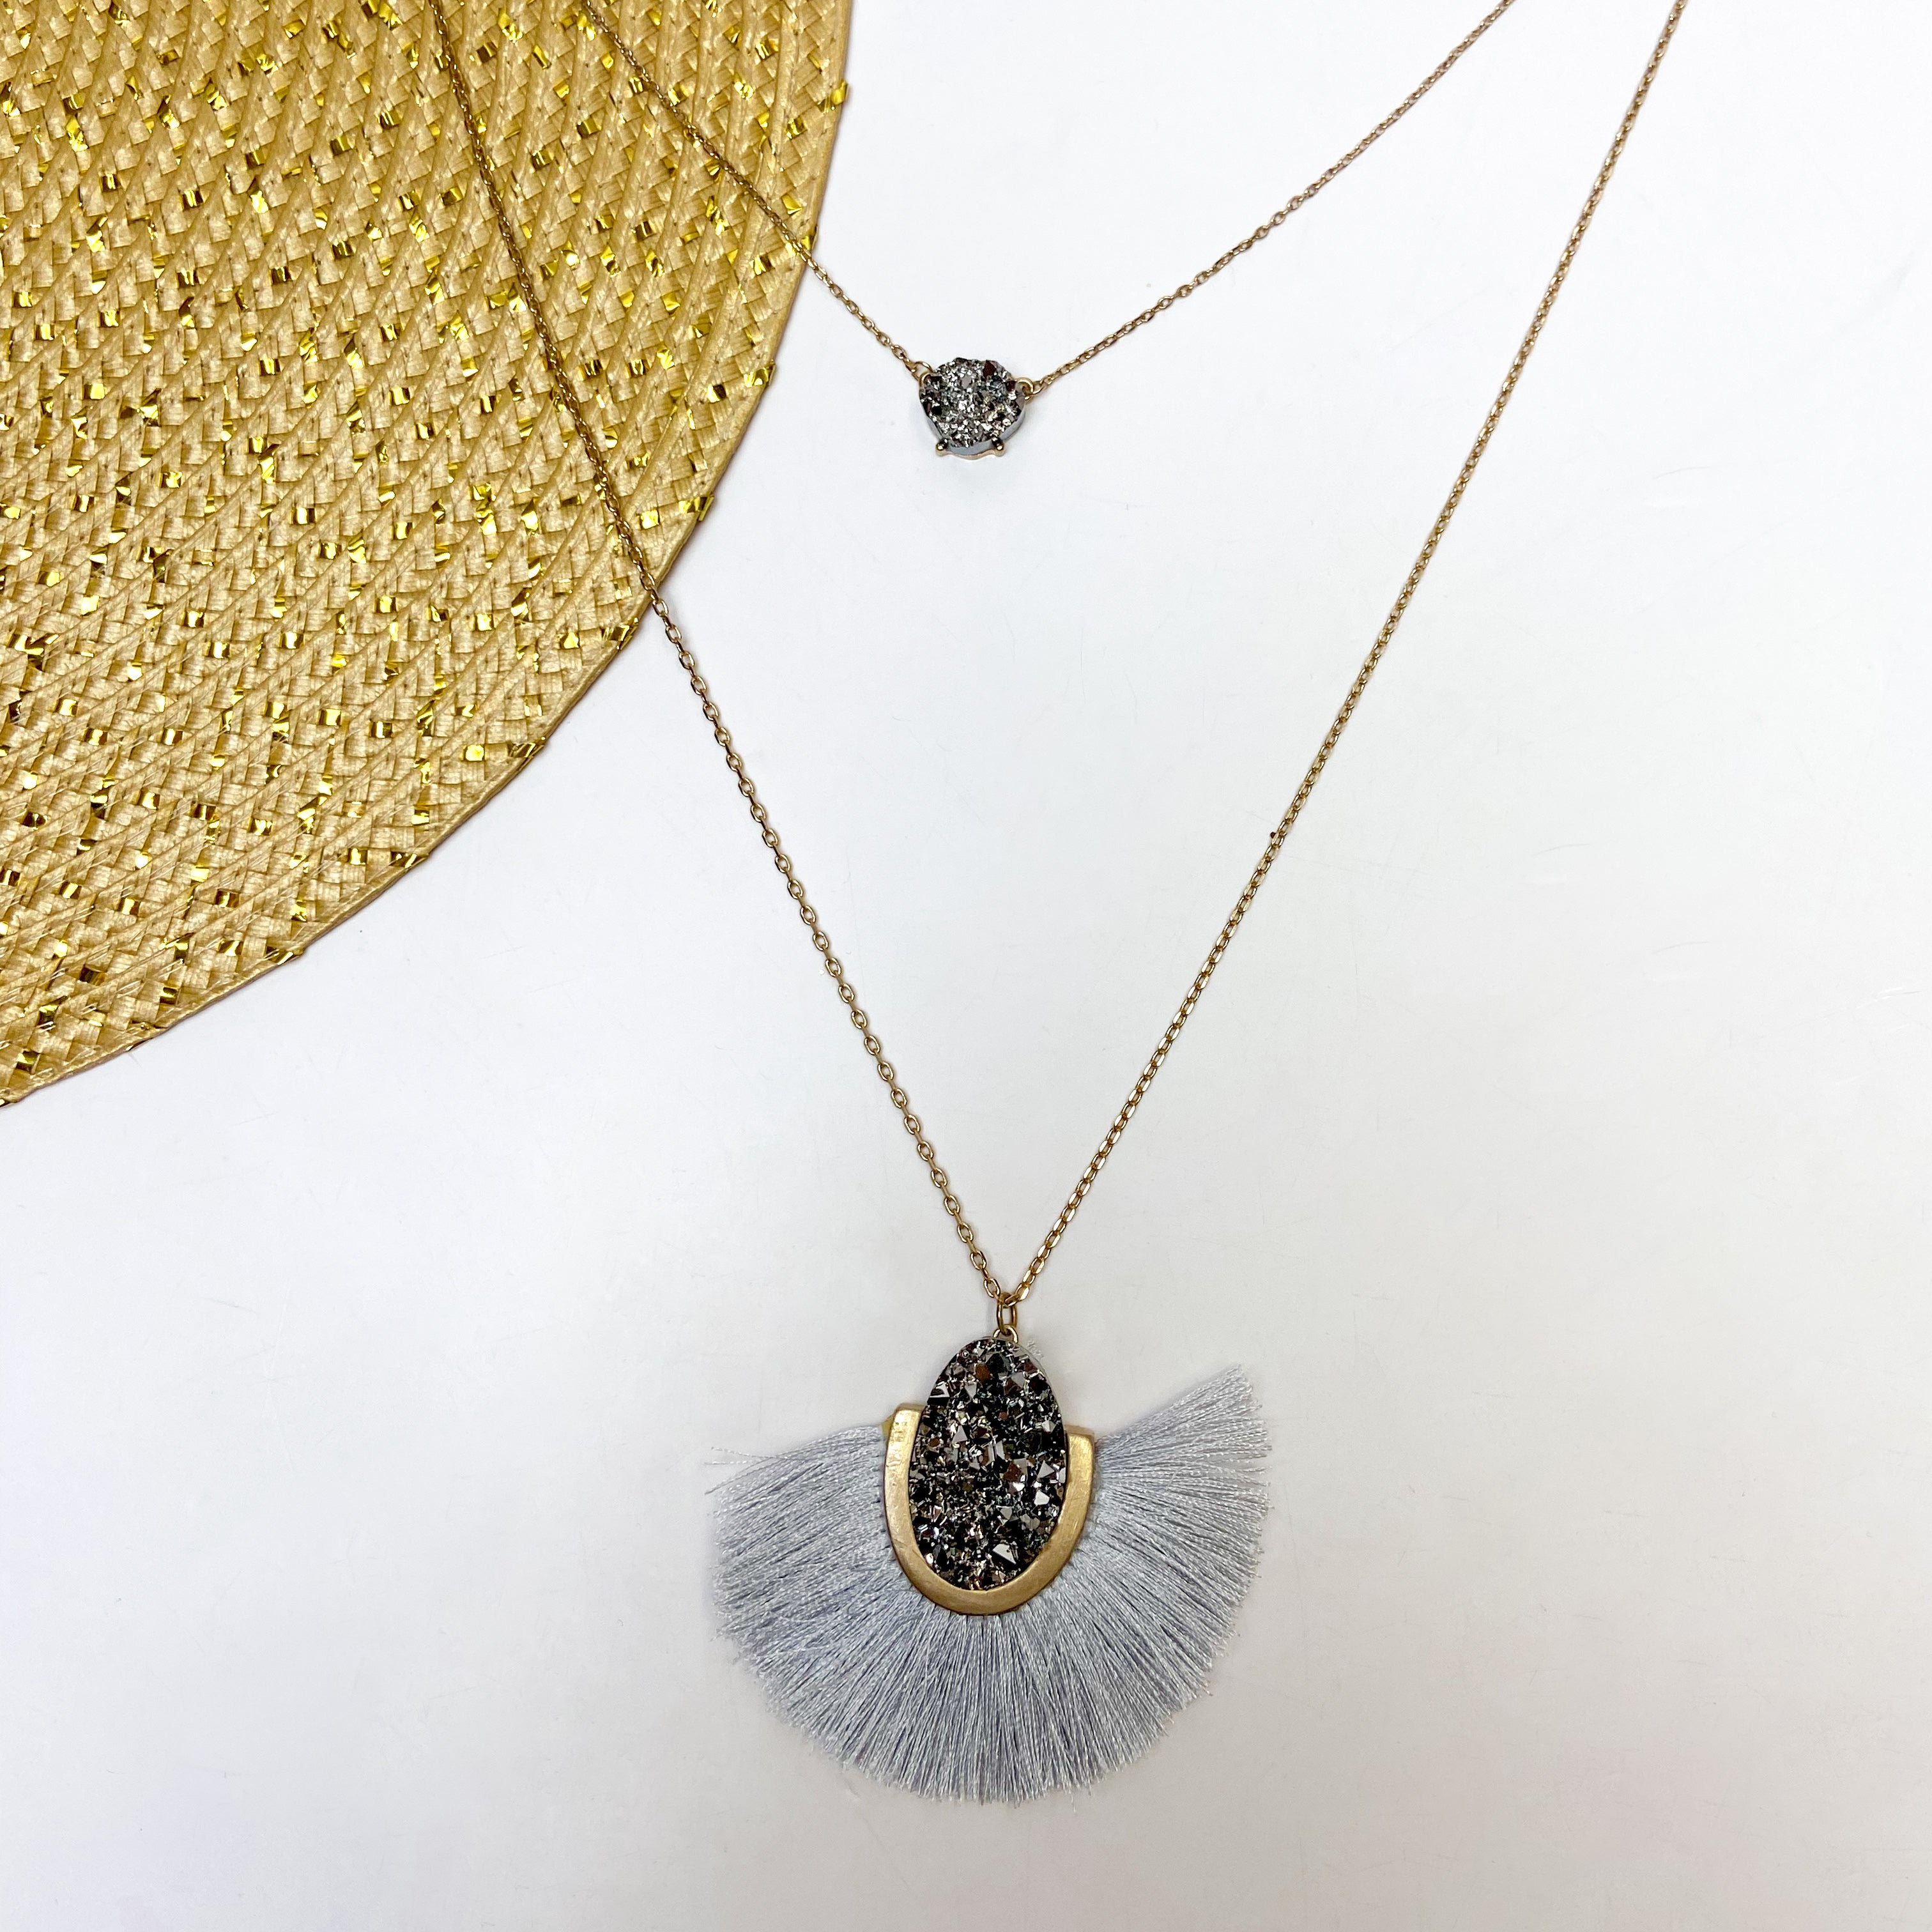 DOUBLE LAYER NECKLACE WITH SMALL DRUZY STONE AND OVAL DRUZY STONE WITH FRINGE TRIM IN LIGHT GRAY | ONLY 1 LEFT!